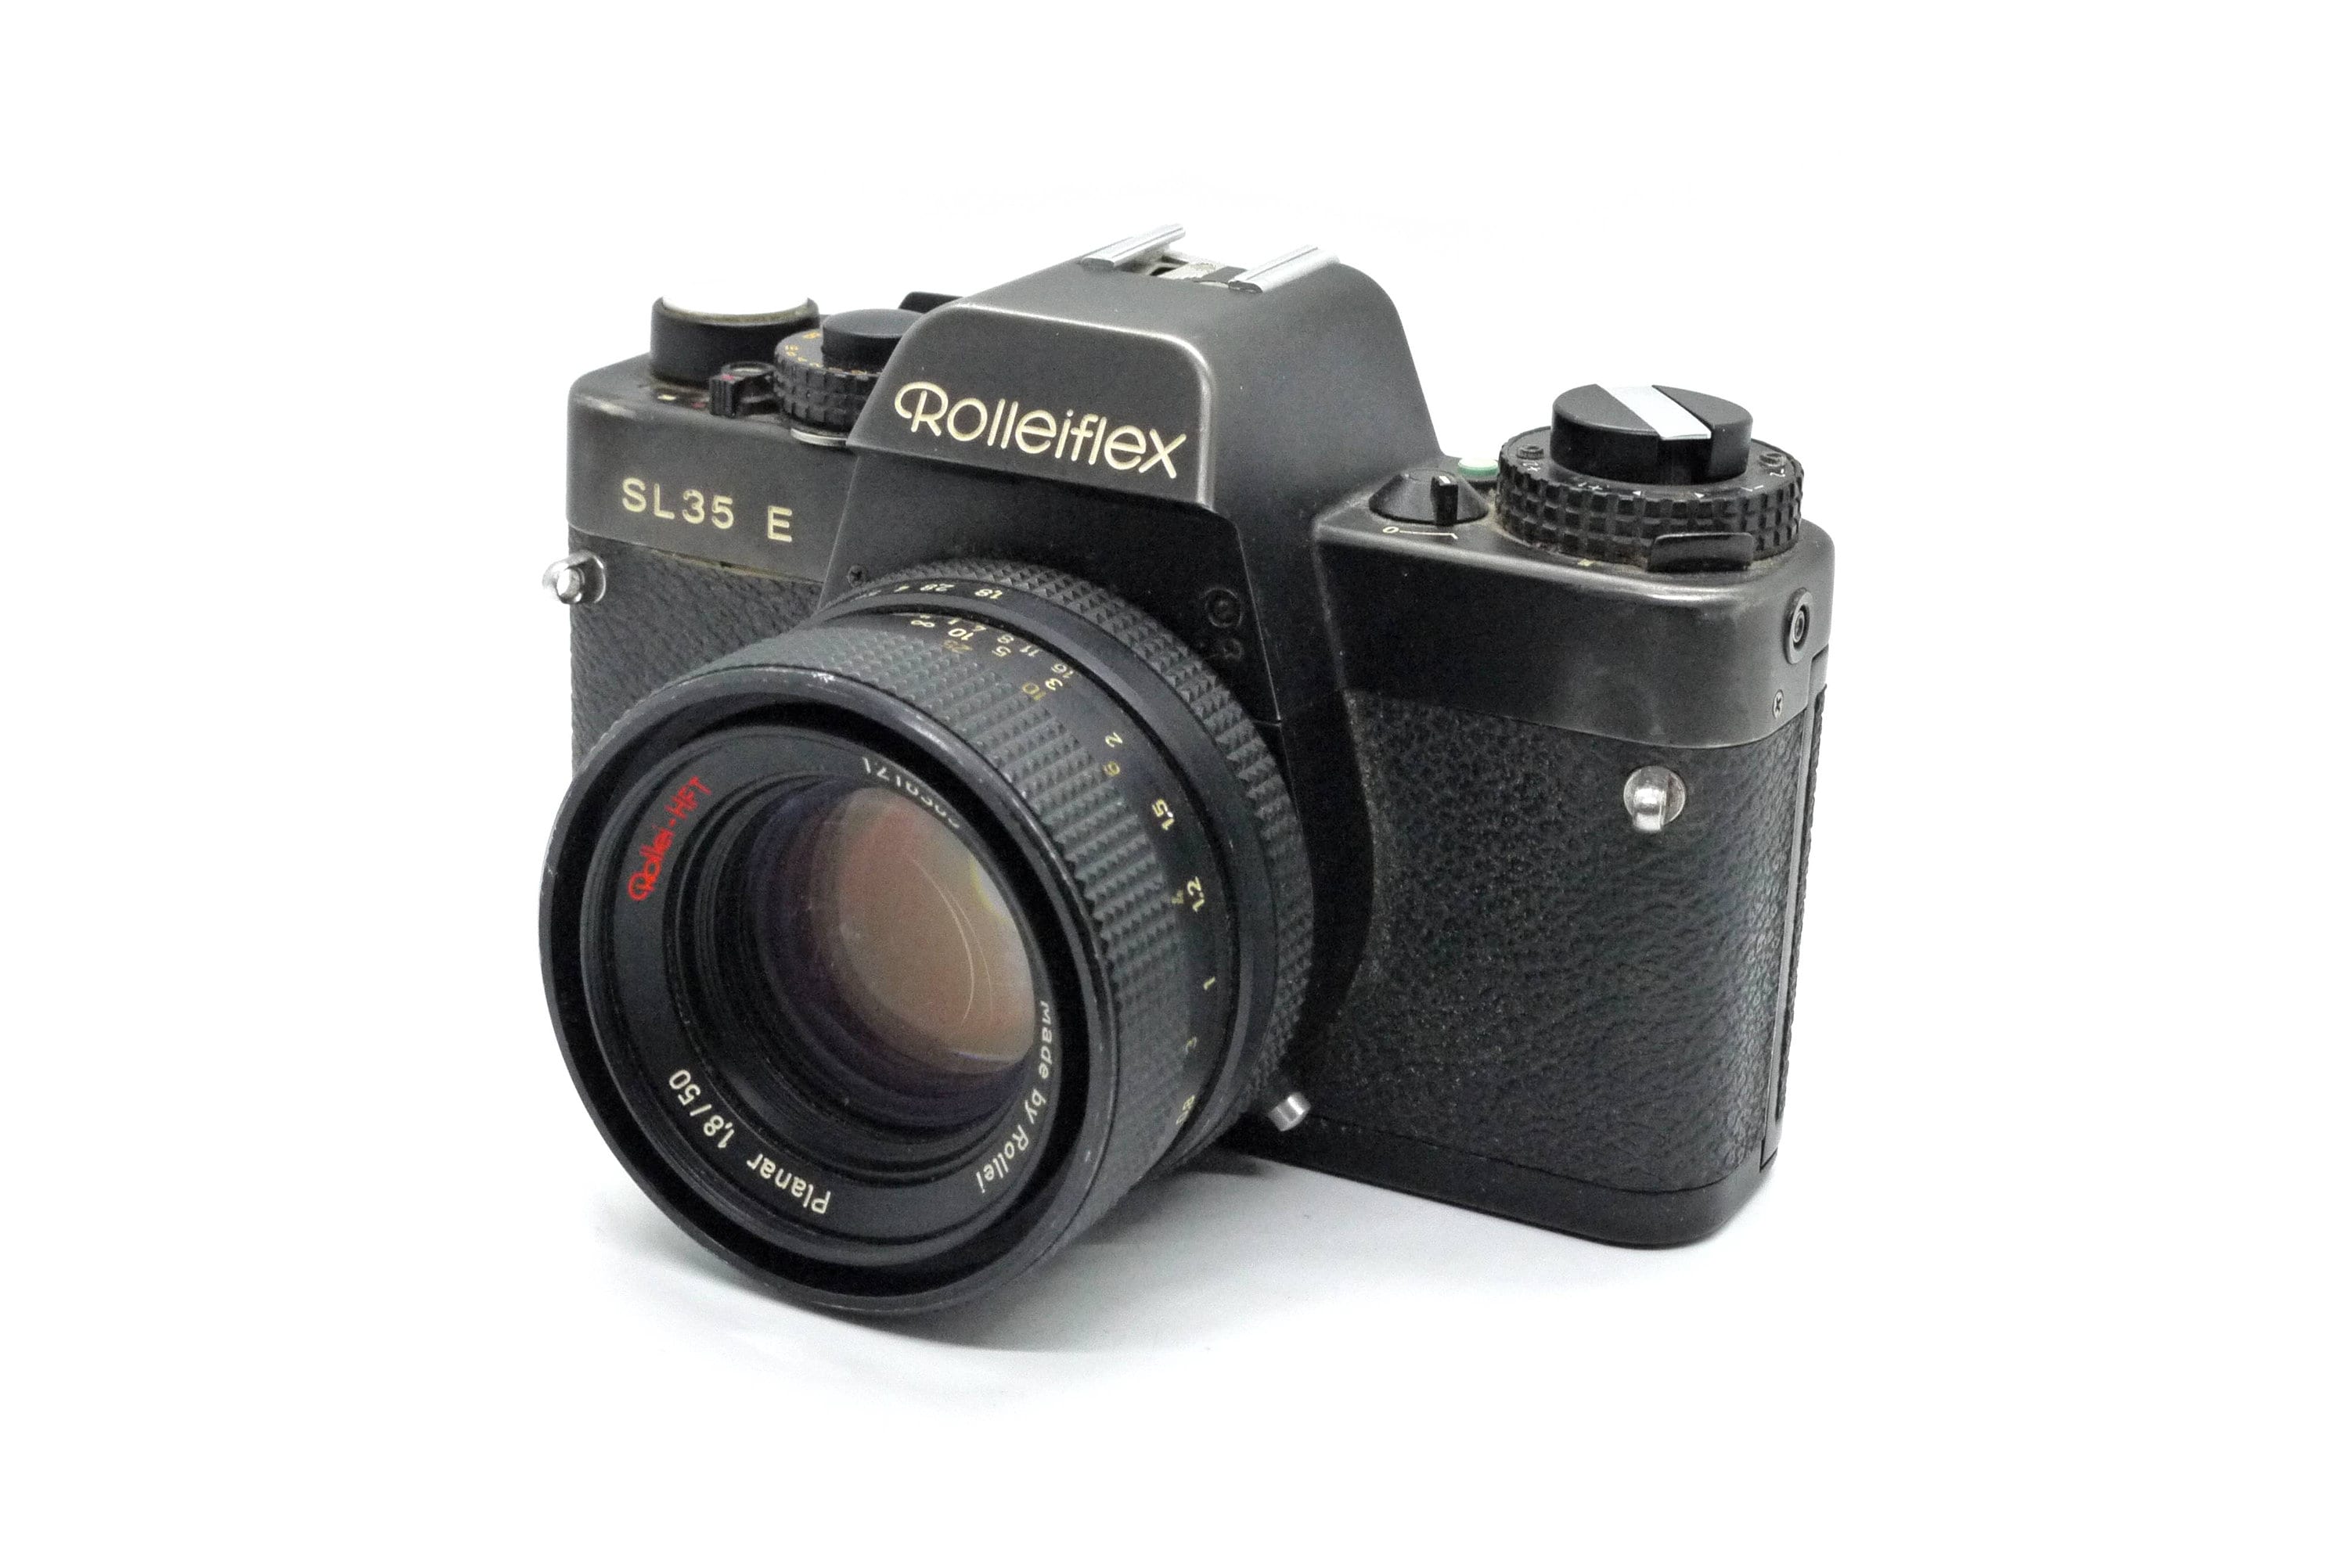 Rolleiflex SL 35 E 35mm SLR camera with Carl Zeiss Planar 50mm F1.8 lens,  tested and working